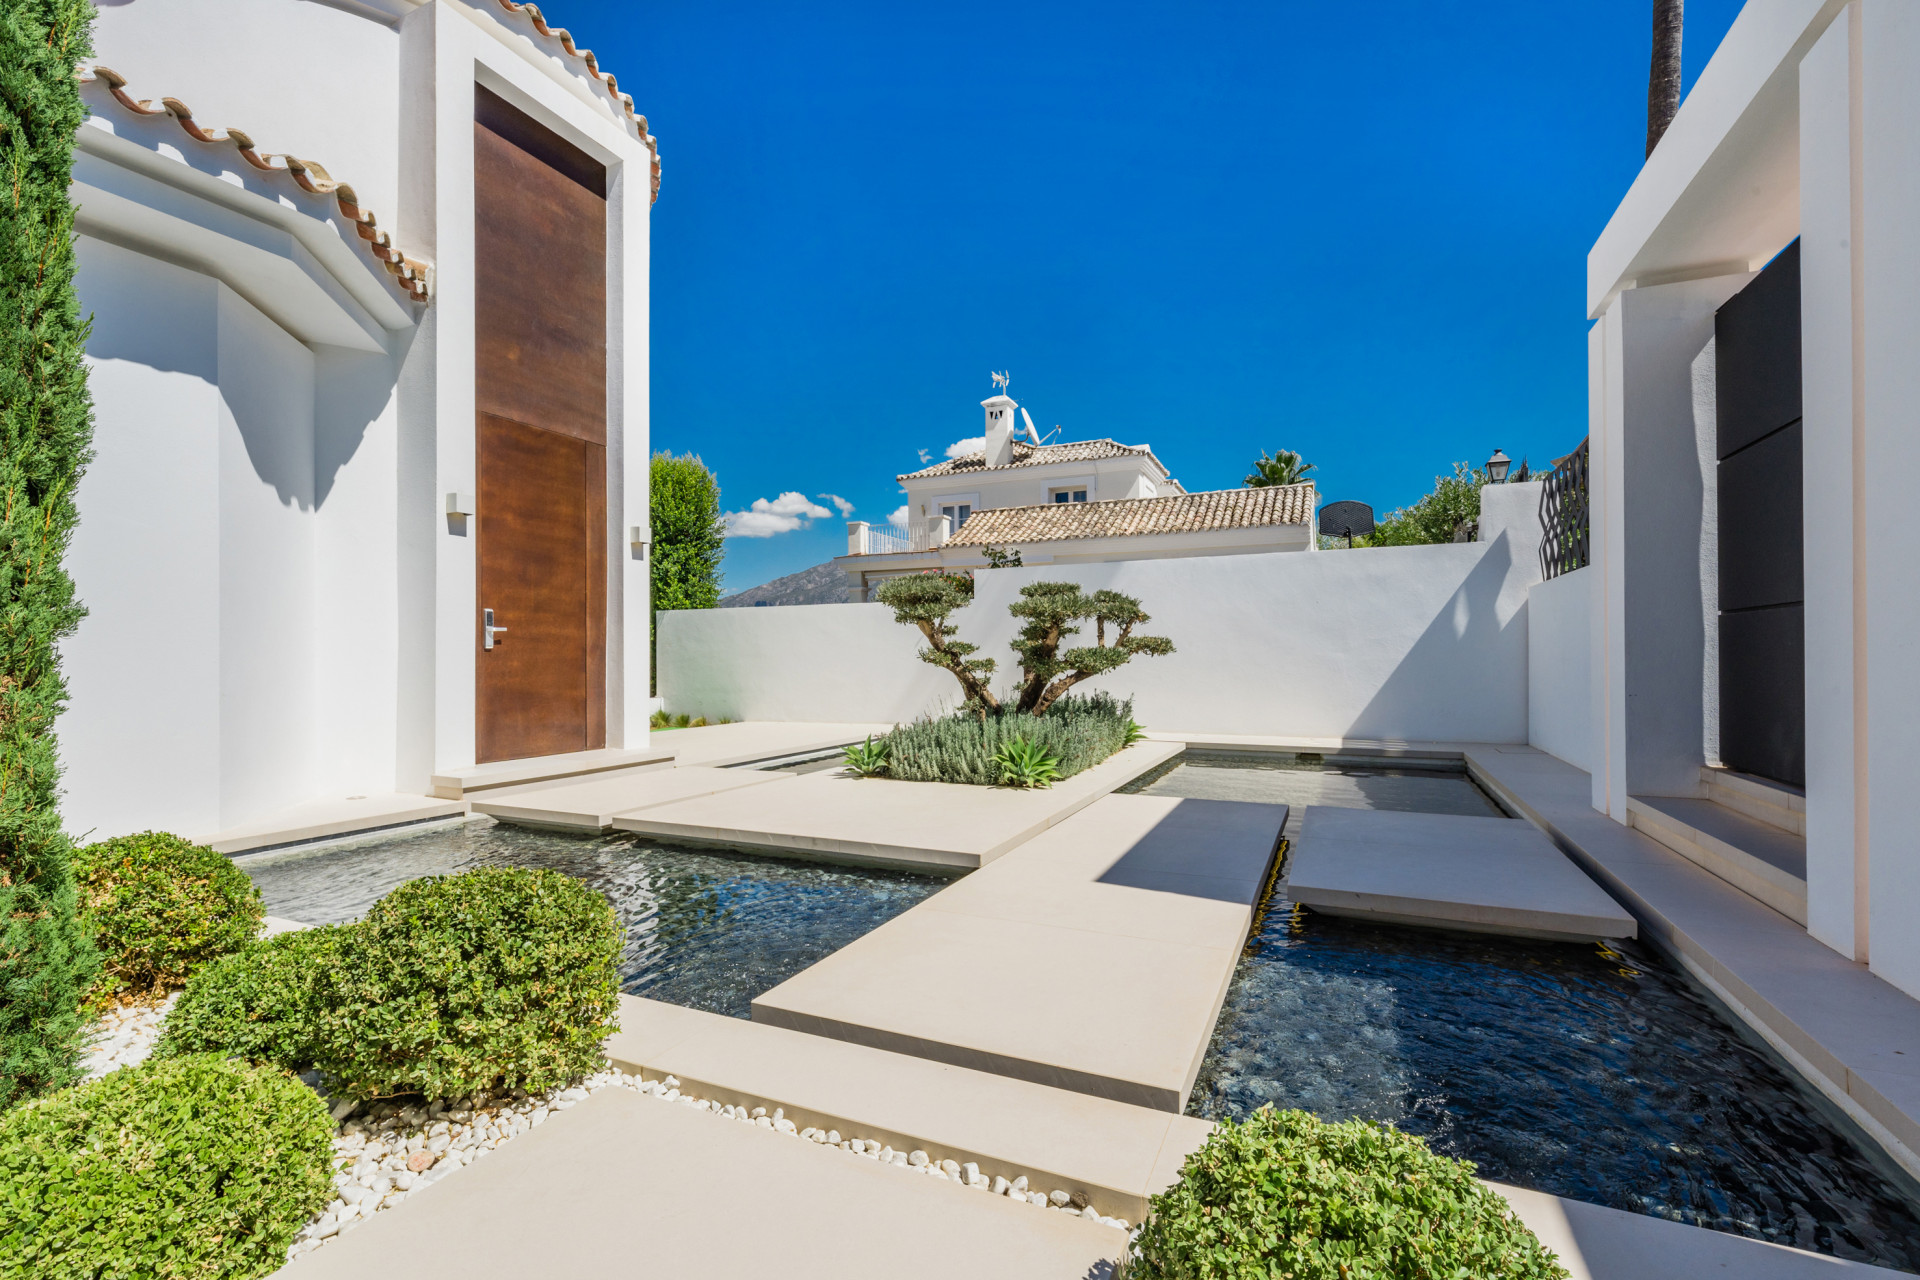 Elegant villa located in the sought after residential area of Los Naranjos, Marbella.